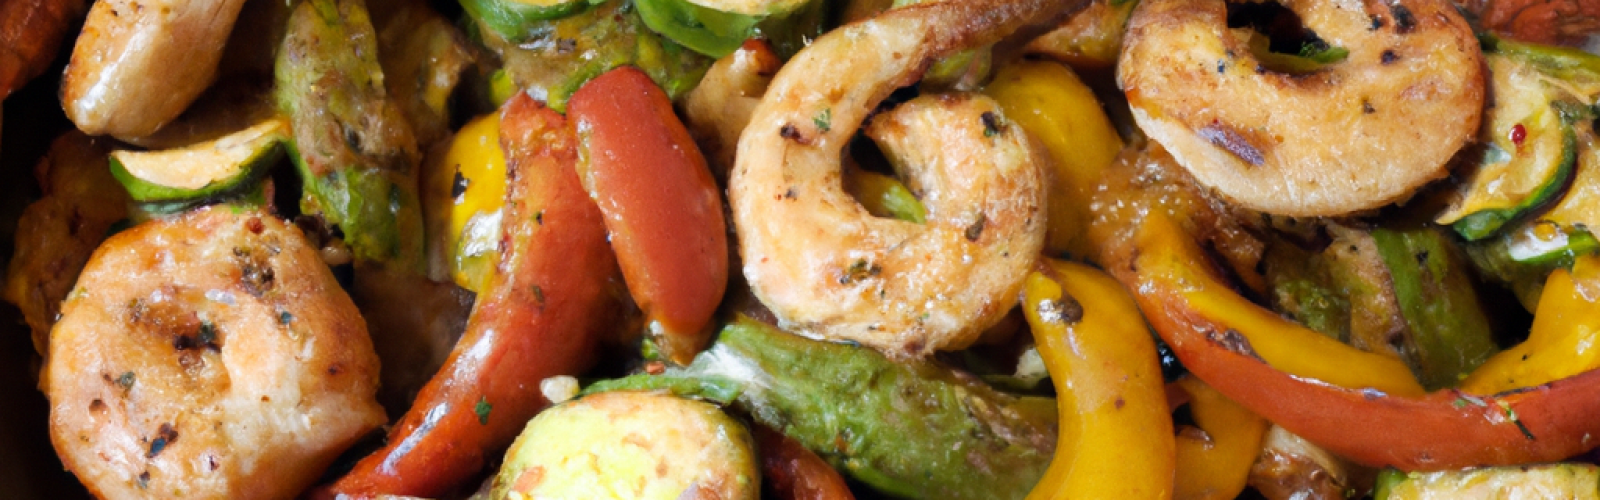 Cajun Shrimp & Sausage with Bell Peppers, Asparagus, Zucchini & Squash